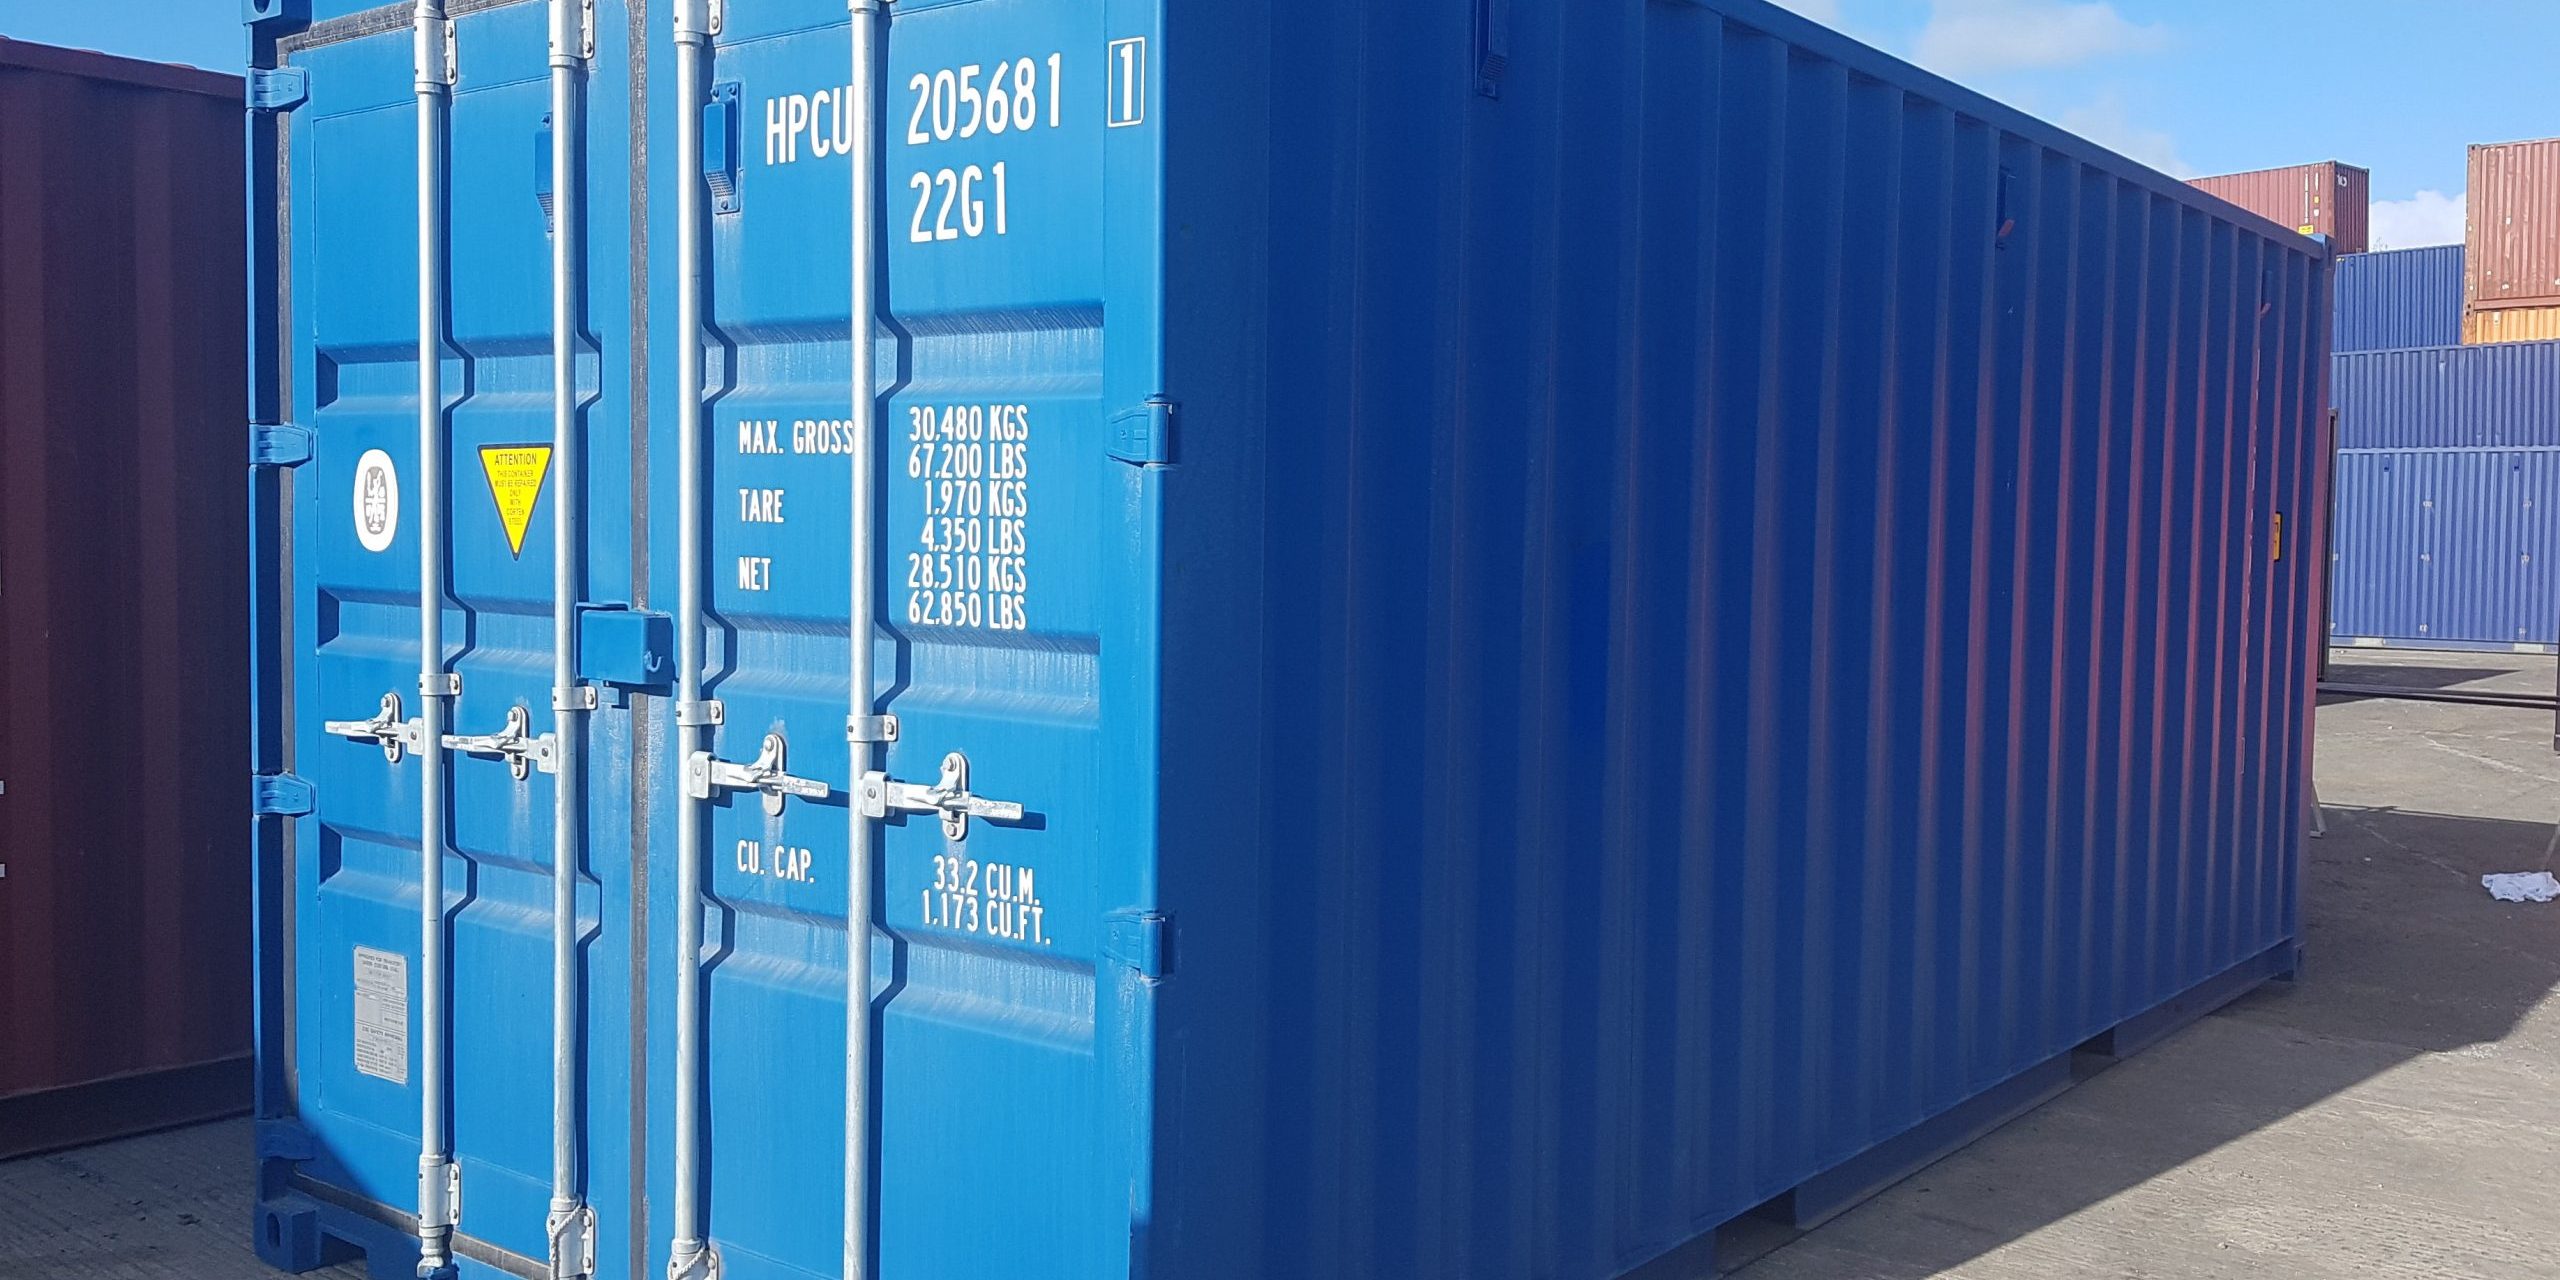 A blue shipping container outside on a clear, sunny day.